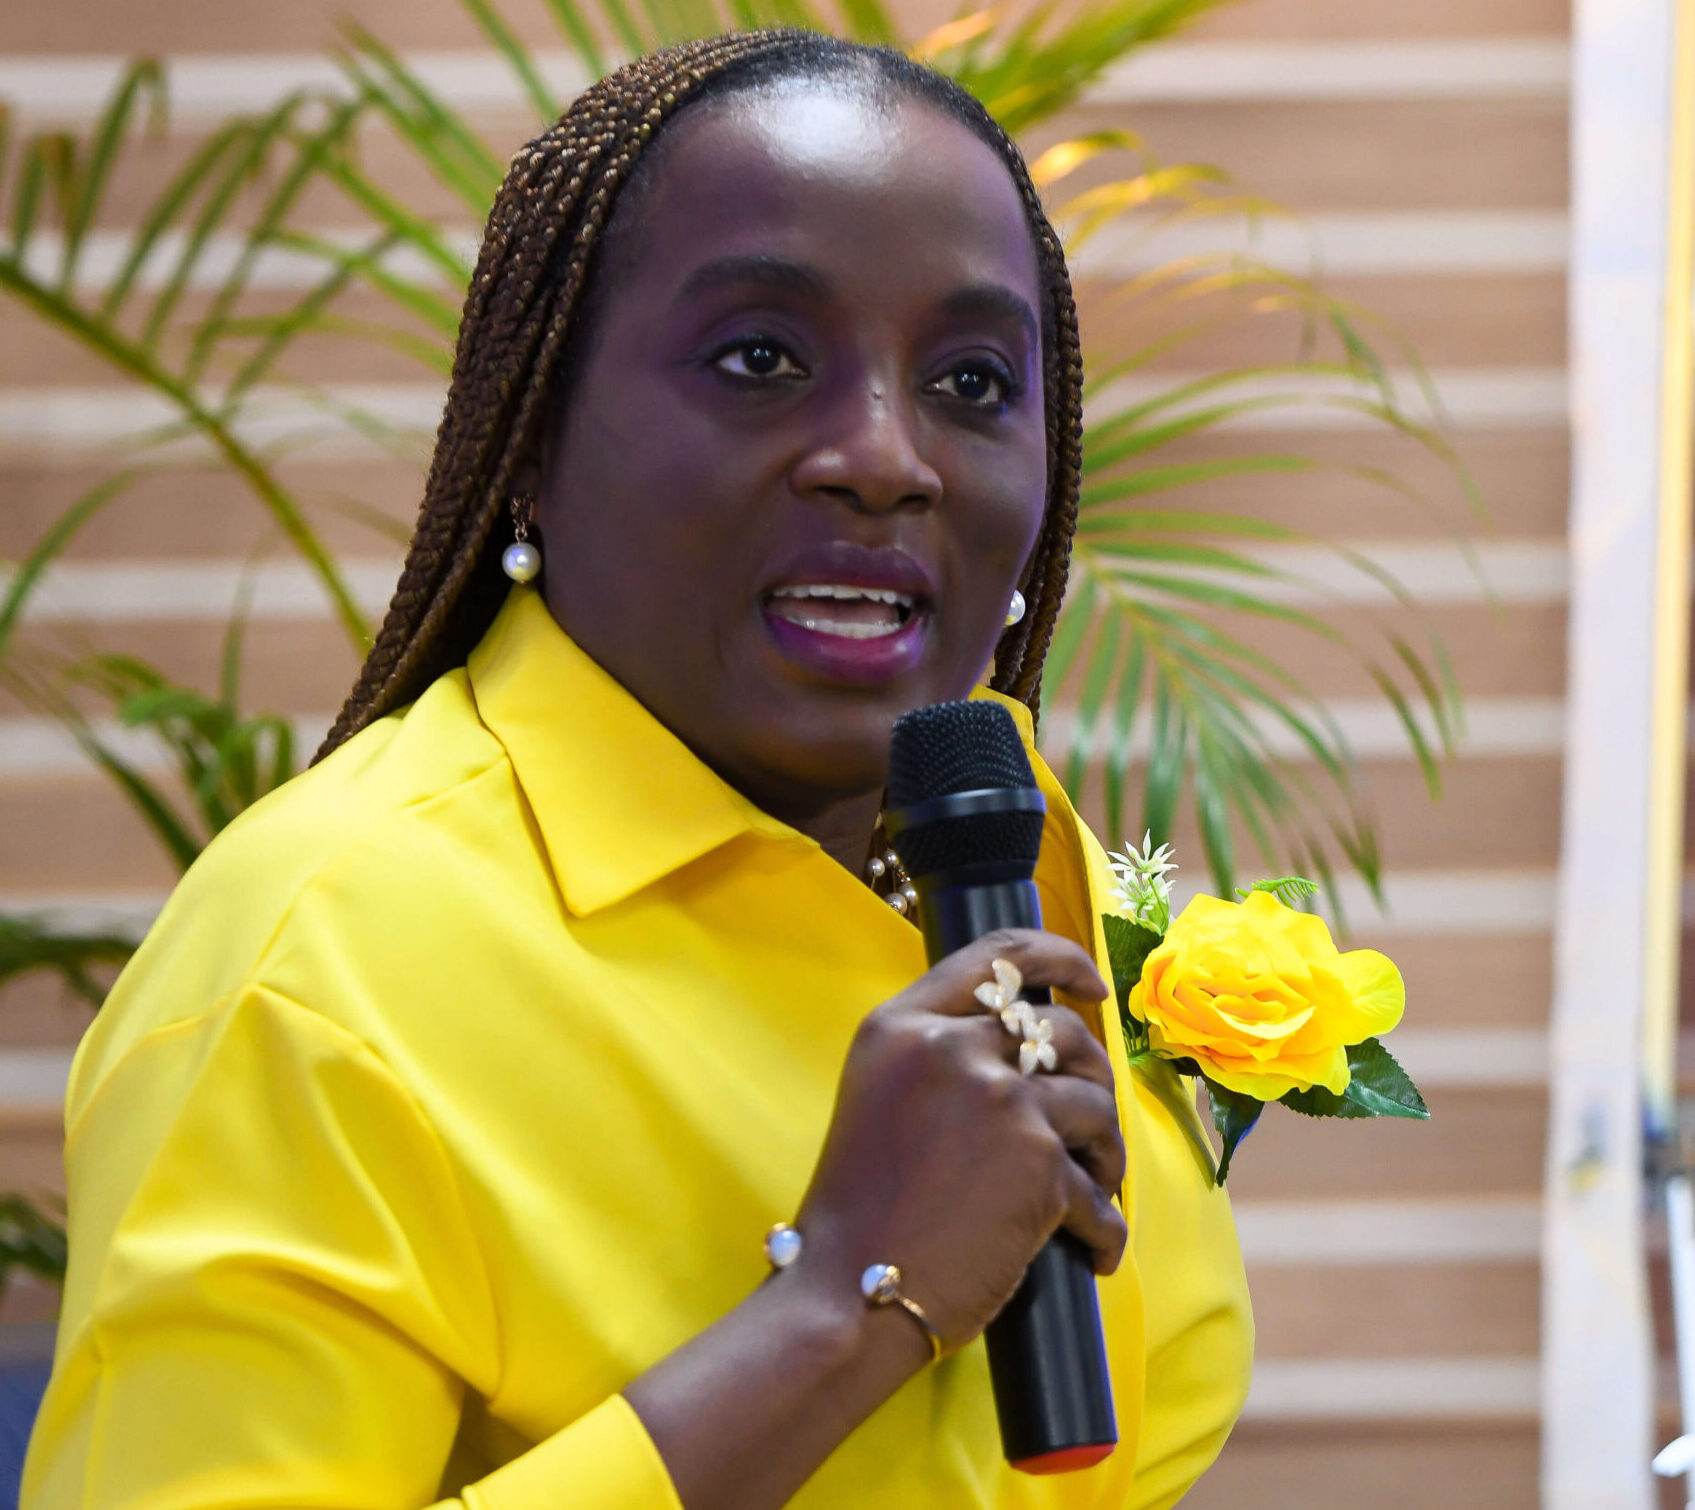 MTN Ghana CFO urges women who want to take up leadership position to make themselves visible